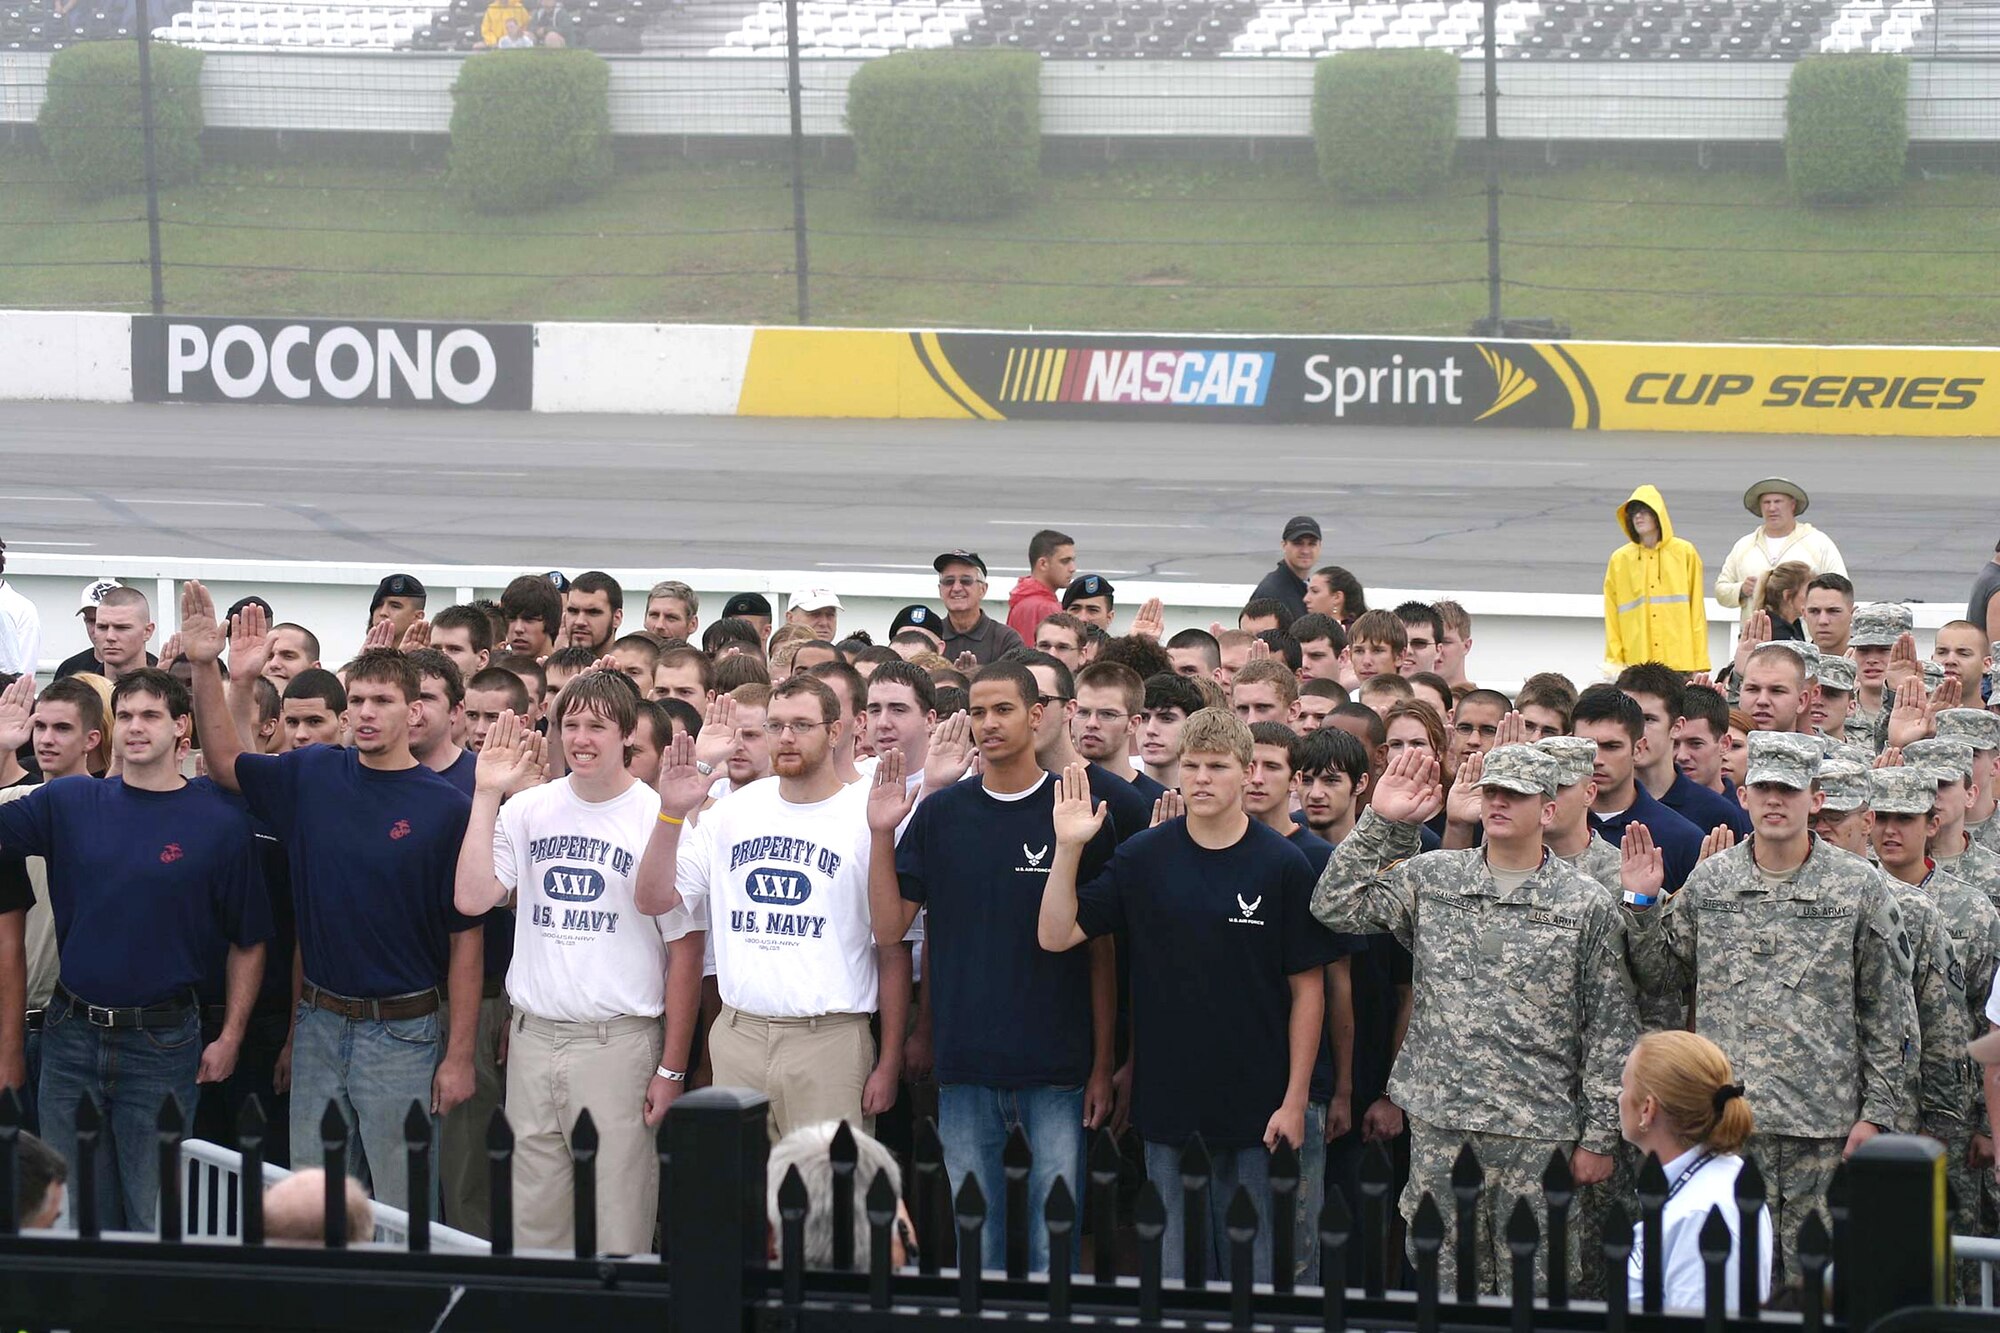 Approximately 100 young men and women destined for the Air Force, Army, Navy or Marines take the oath of enlistment into their respective military service's delayed-entry program at the Pocono Raceway Aug. 2. Air Force Chief of Staff Gen. Norton Schwartz conducted the joint-service ceremony. (U.S. Air Force photo/Dale Eckroth)  
